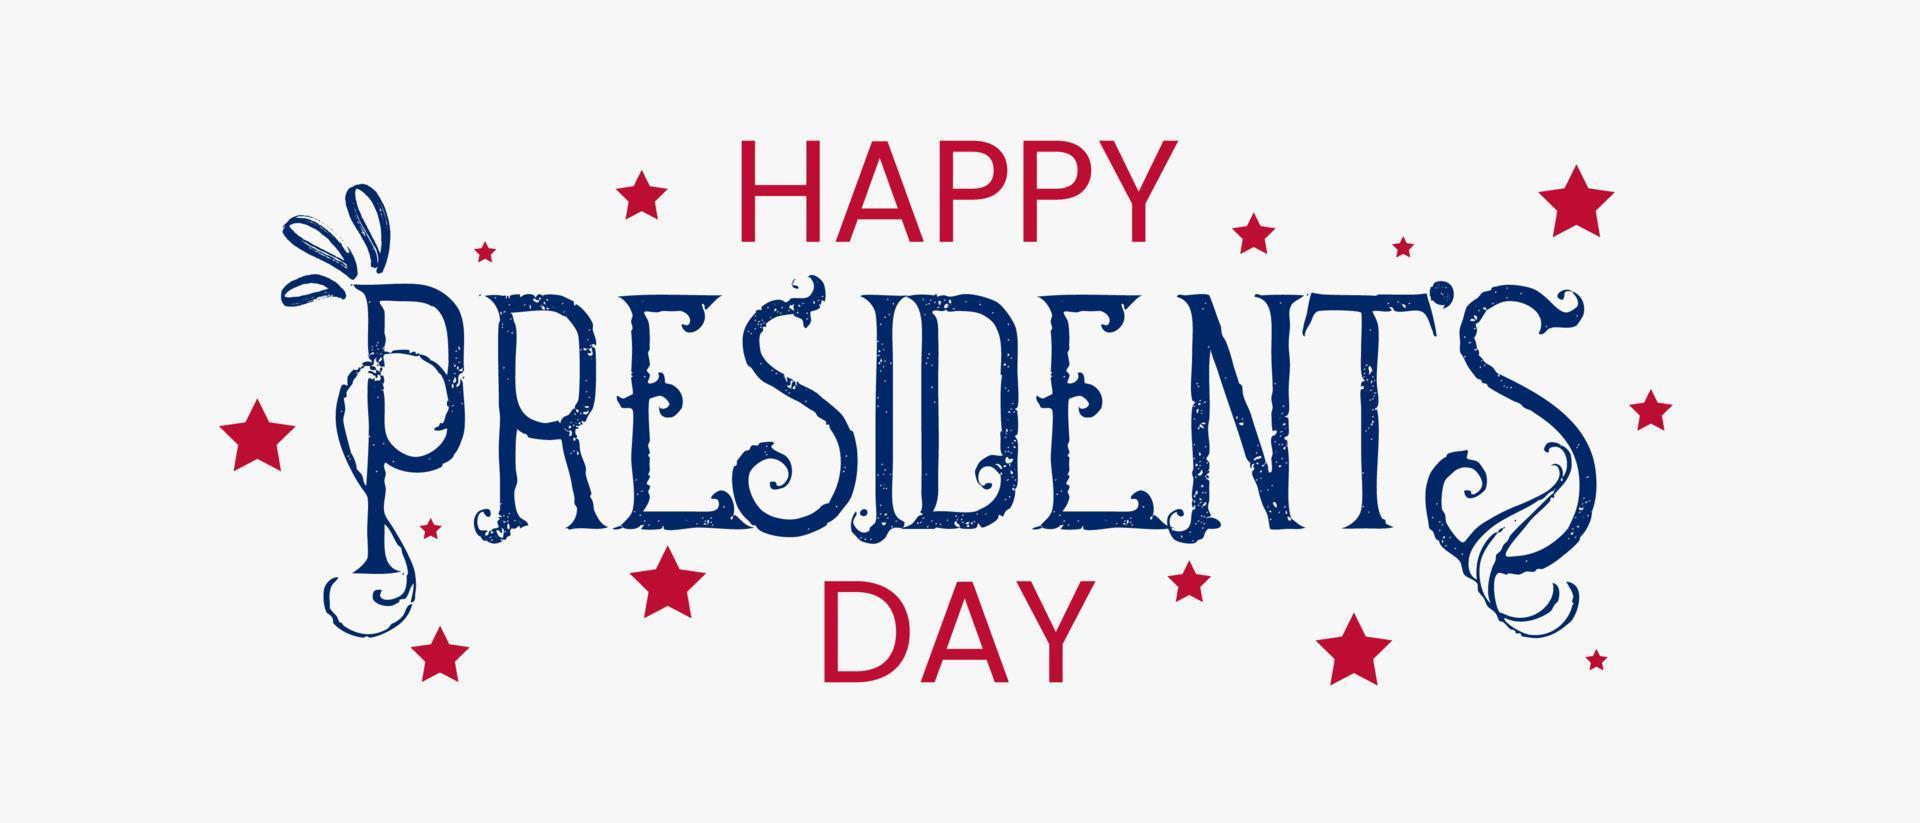 Happy Presidents Day with stars and Hand drawn text lettering for Presidents day in USA. Script. Calligraphic design for print greetings card, sale banner, poster. Colorful vector